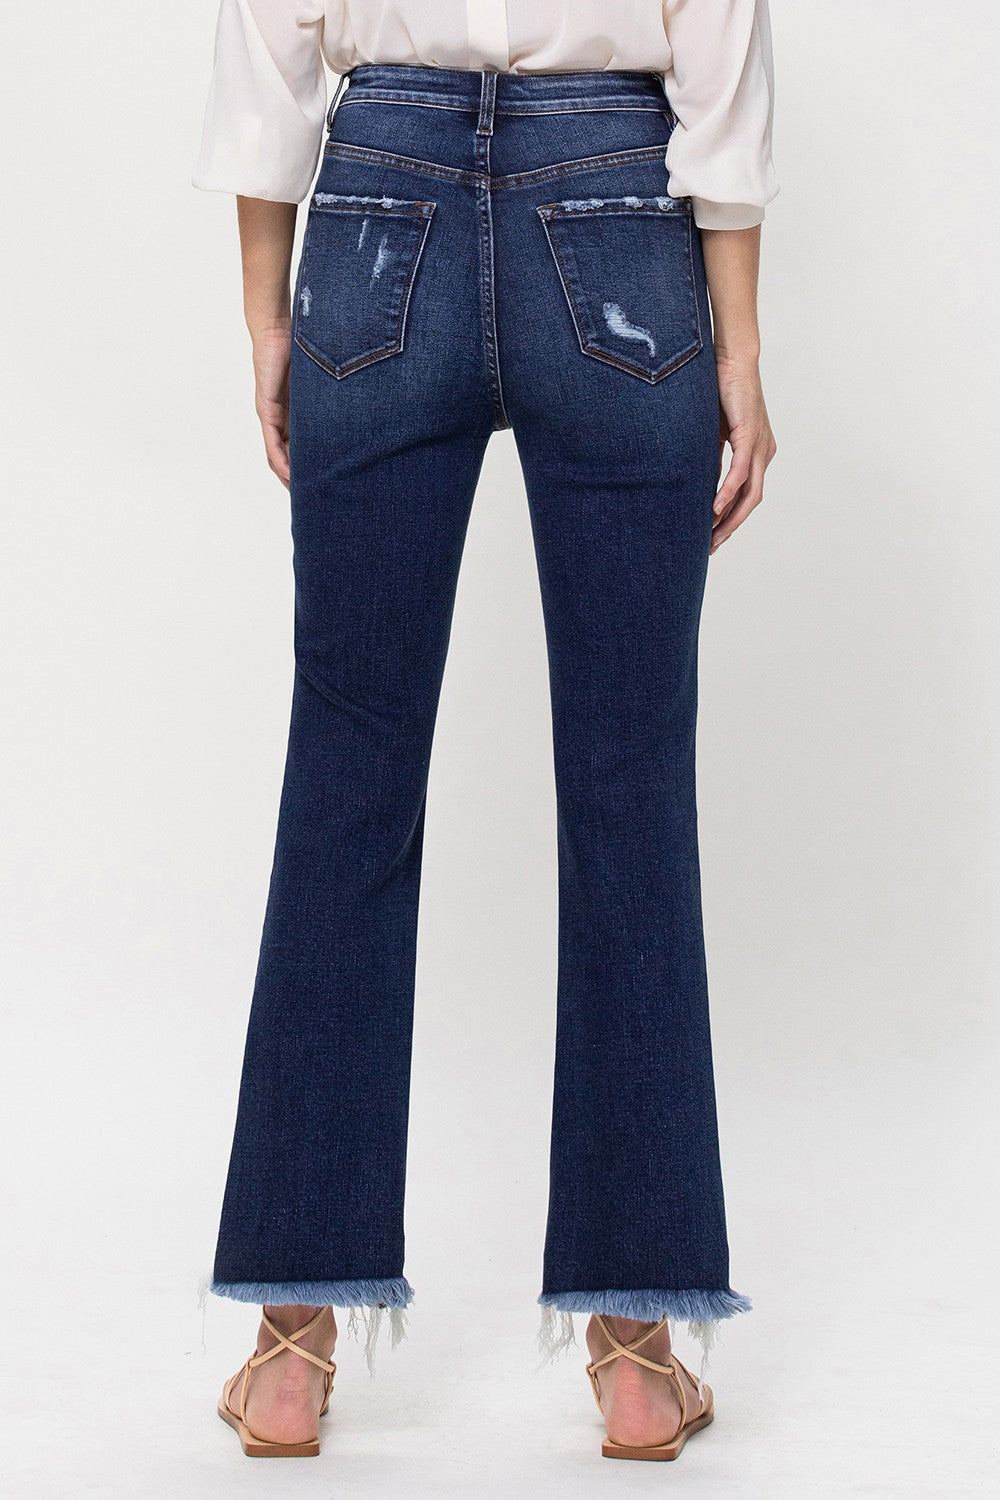 The Olivia Jeans